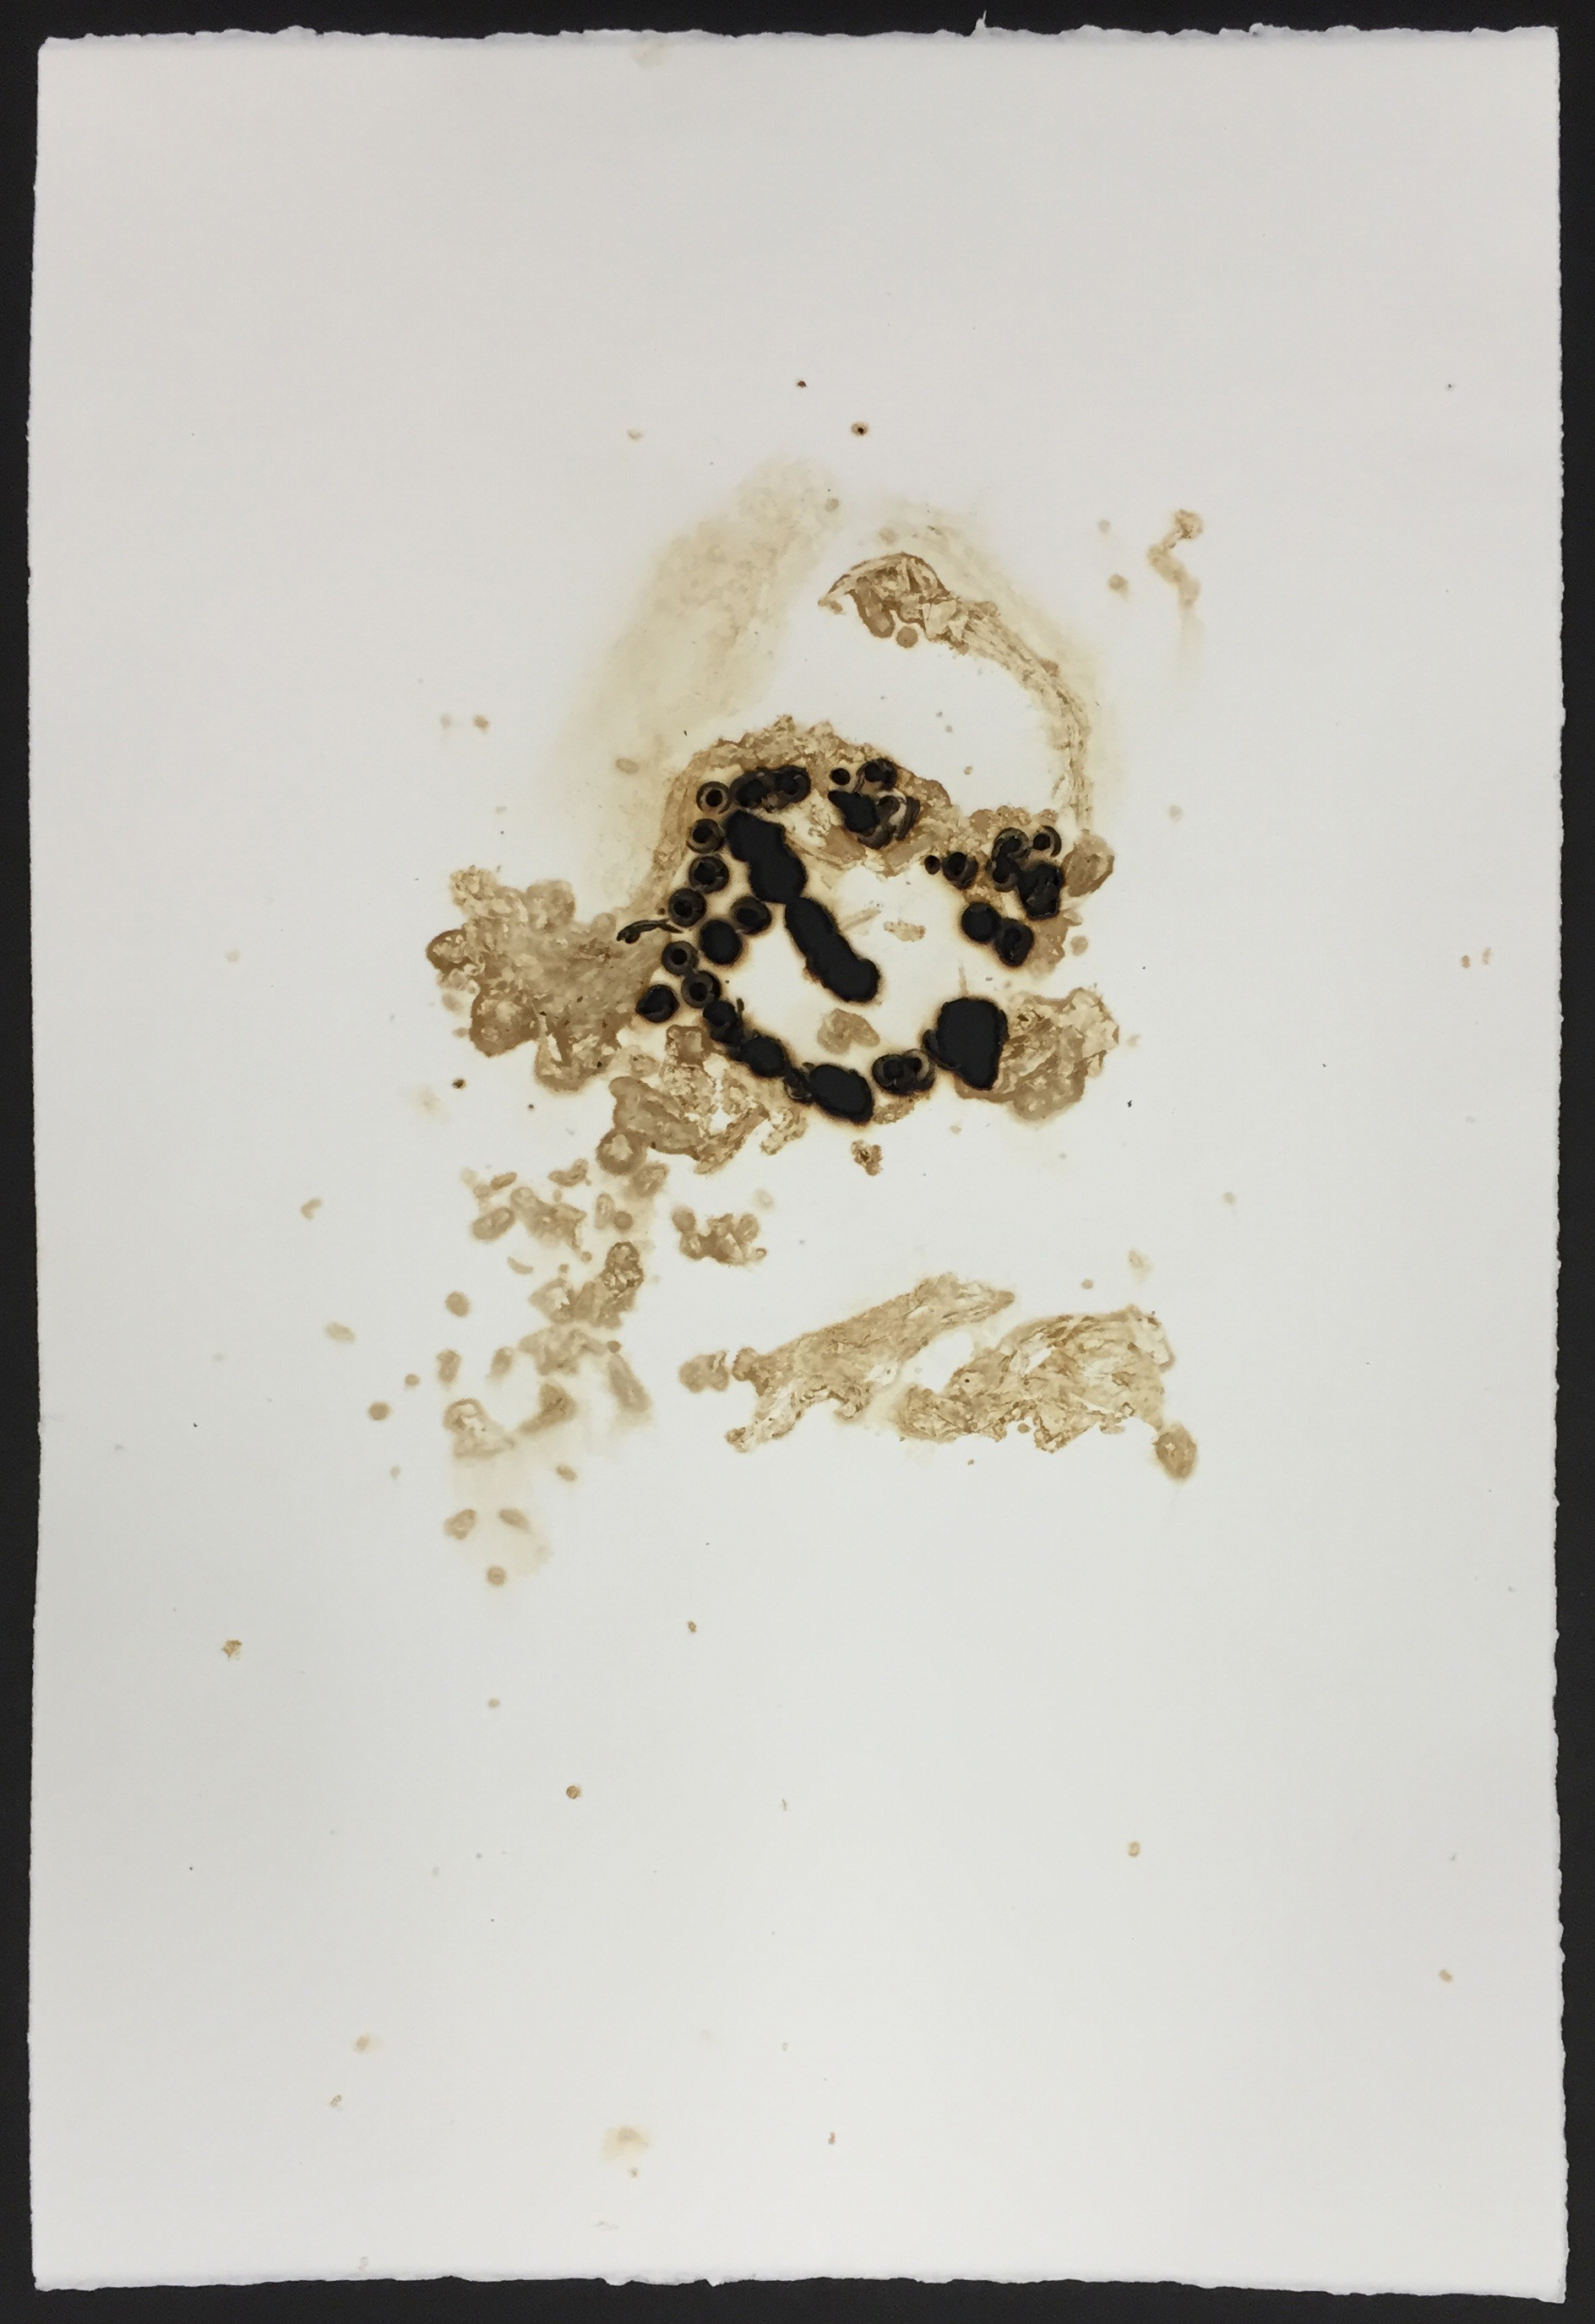  Tobacco print with scorched paper  15x22 